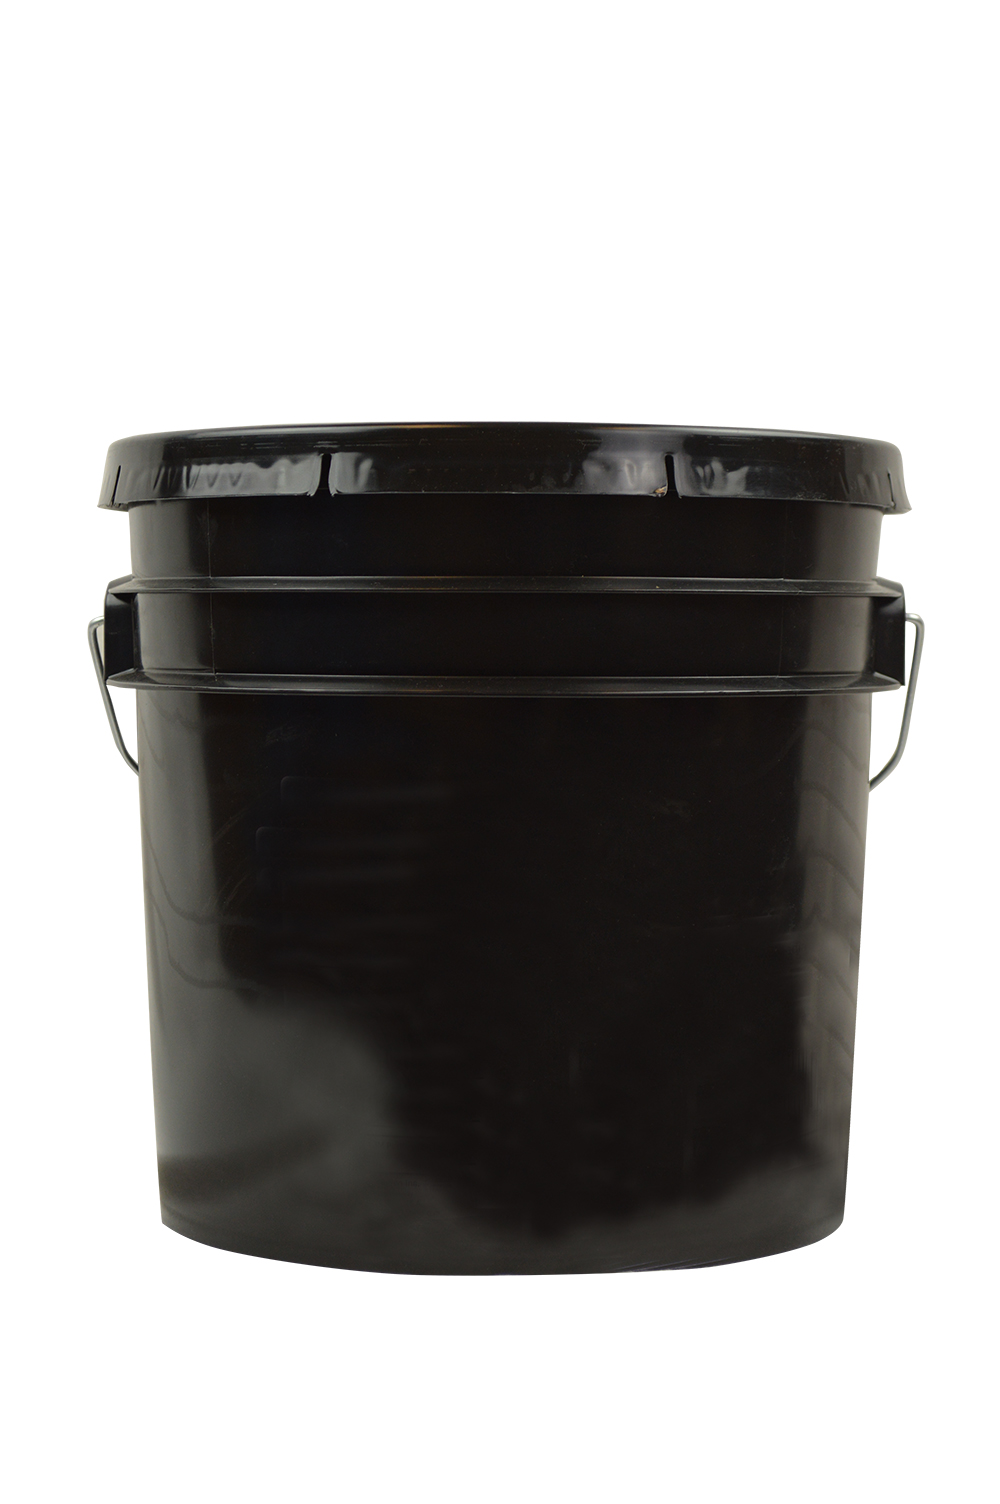 5.3 Gallon White Rectangular Bucket/Pail with Hinged Snap Lid, 4 Pack